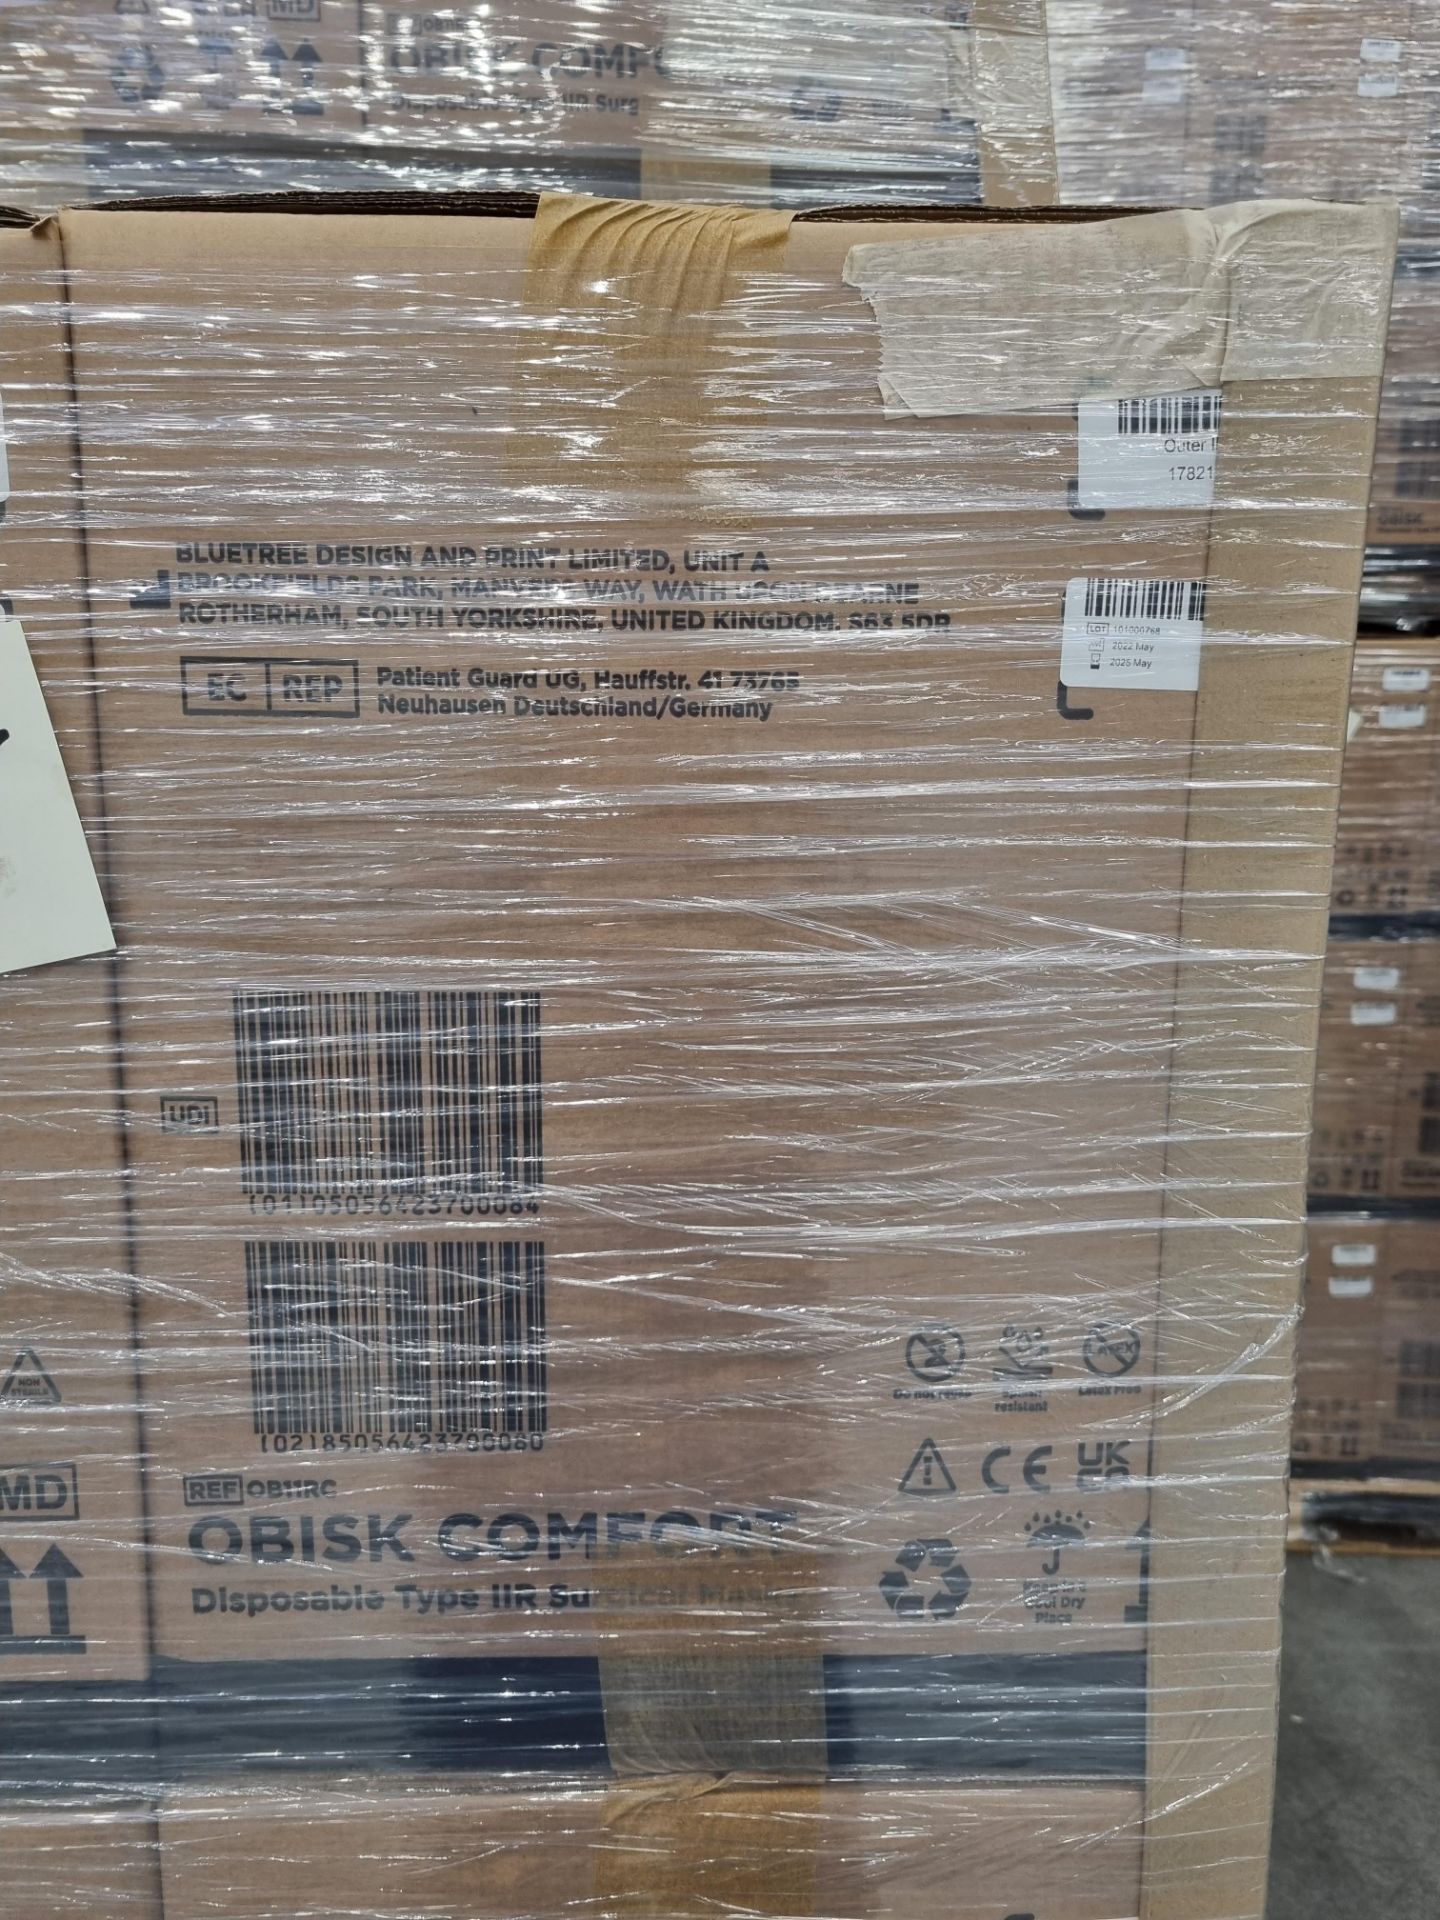 14x pallets across 2 rows of Obisk Comfort Disposable Type 11R Surgical Masks - Image 2 of 2